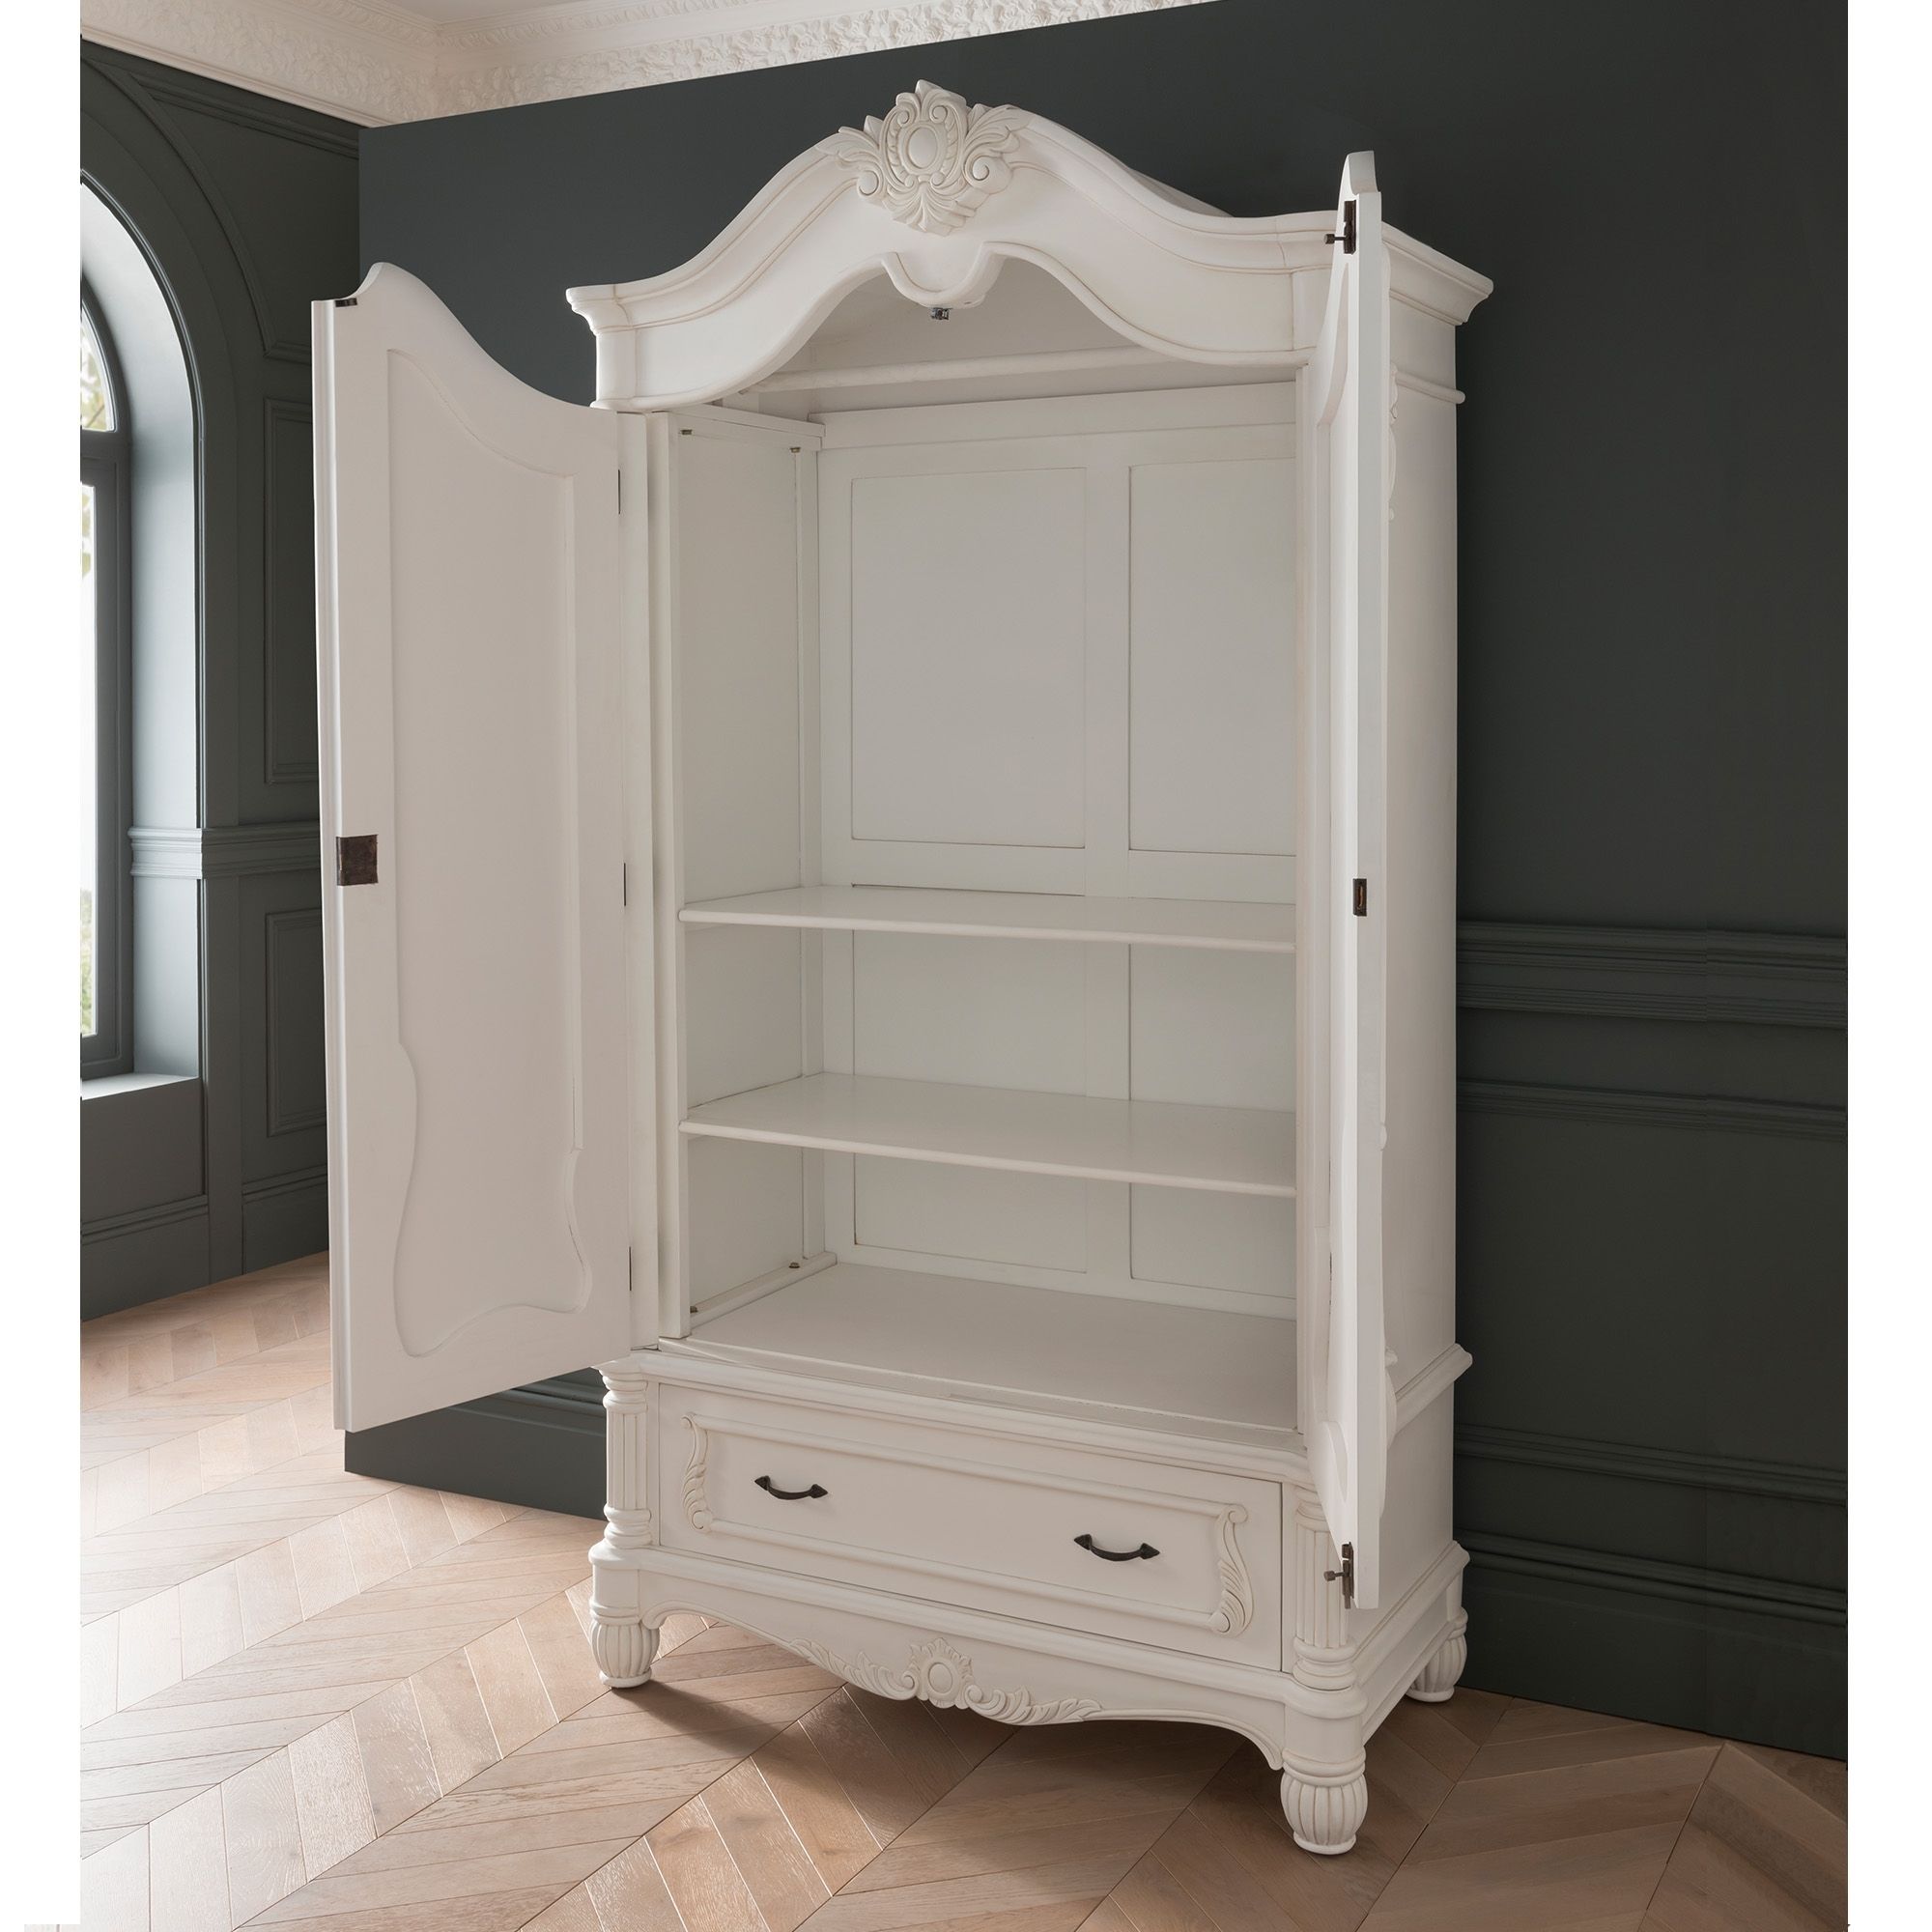 Antique French Style White Finished 1 Drawer Wardrobe | Homesdirect365 Pertaining To Single White Wardrobes With Drawers (View 5 of 15)